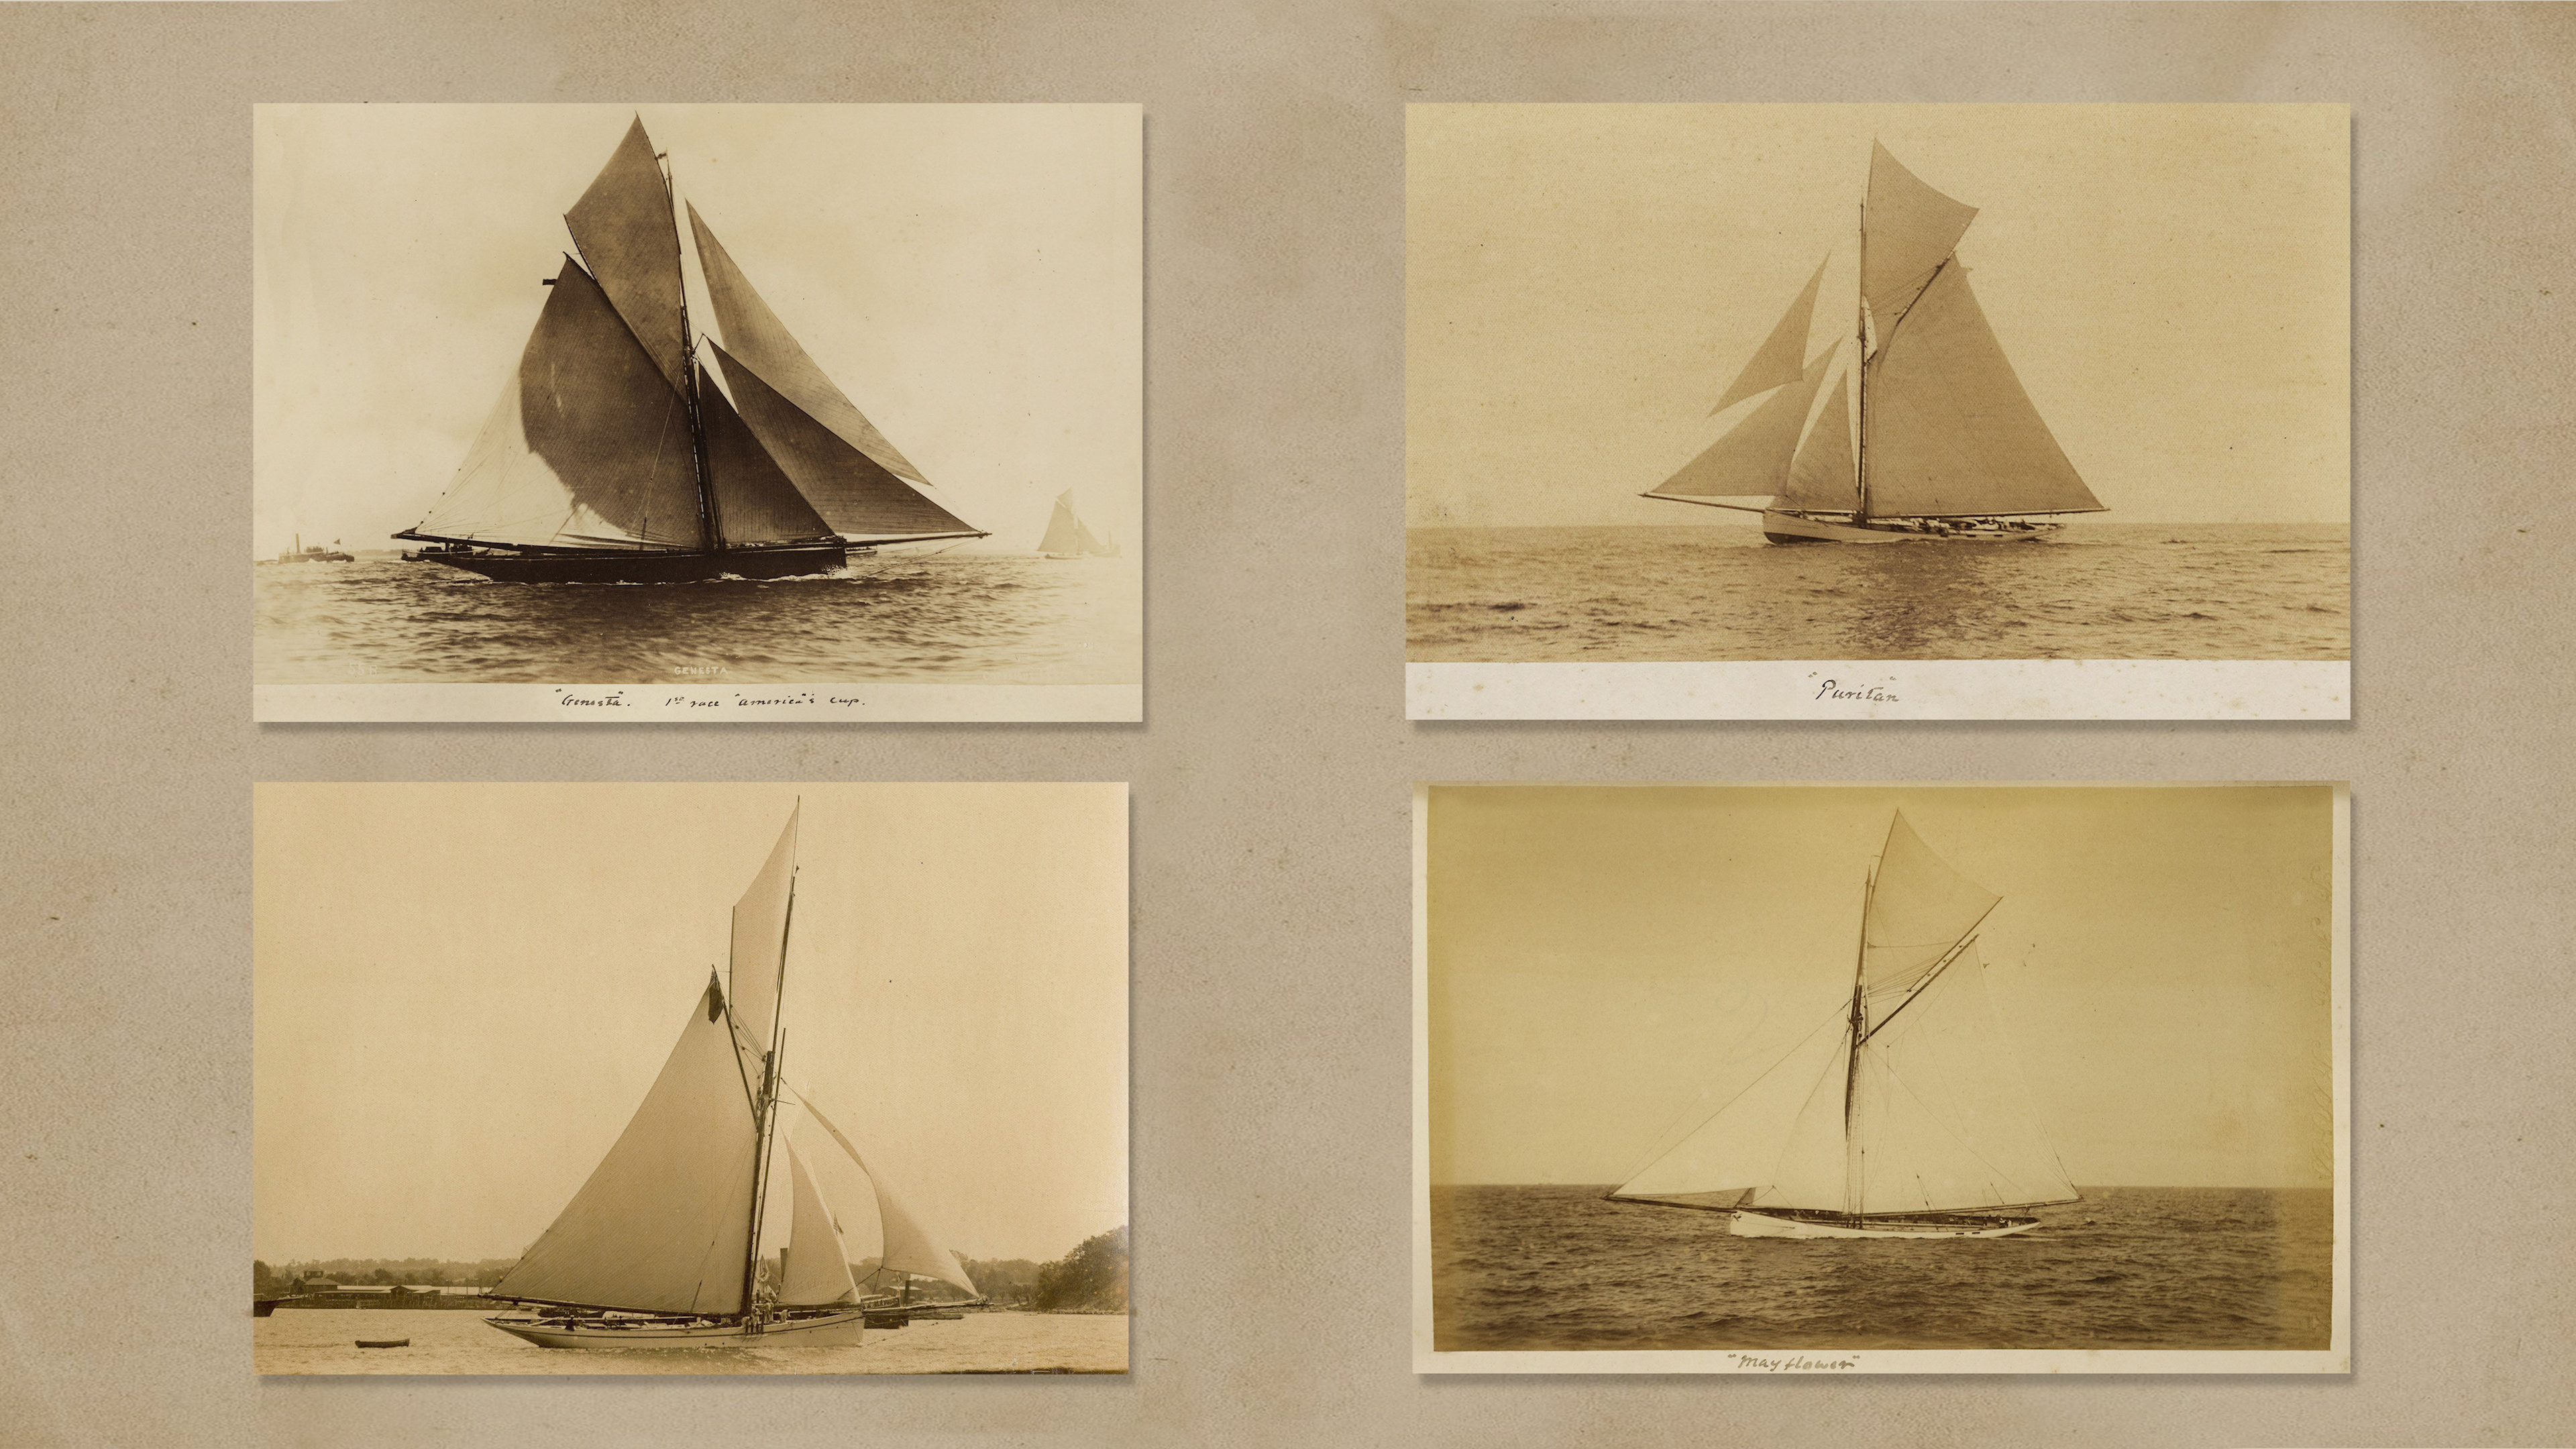 Two pairs of America’s Cup contestants: 1885 - Puritan and Genesta, 1886 - Mayflower and Galatea